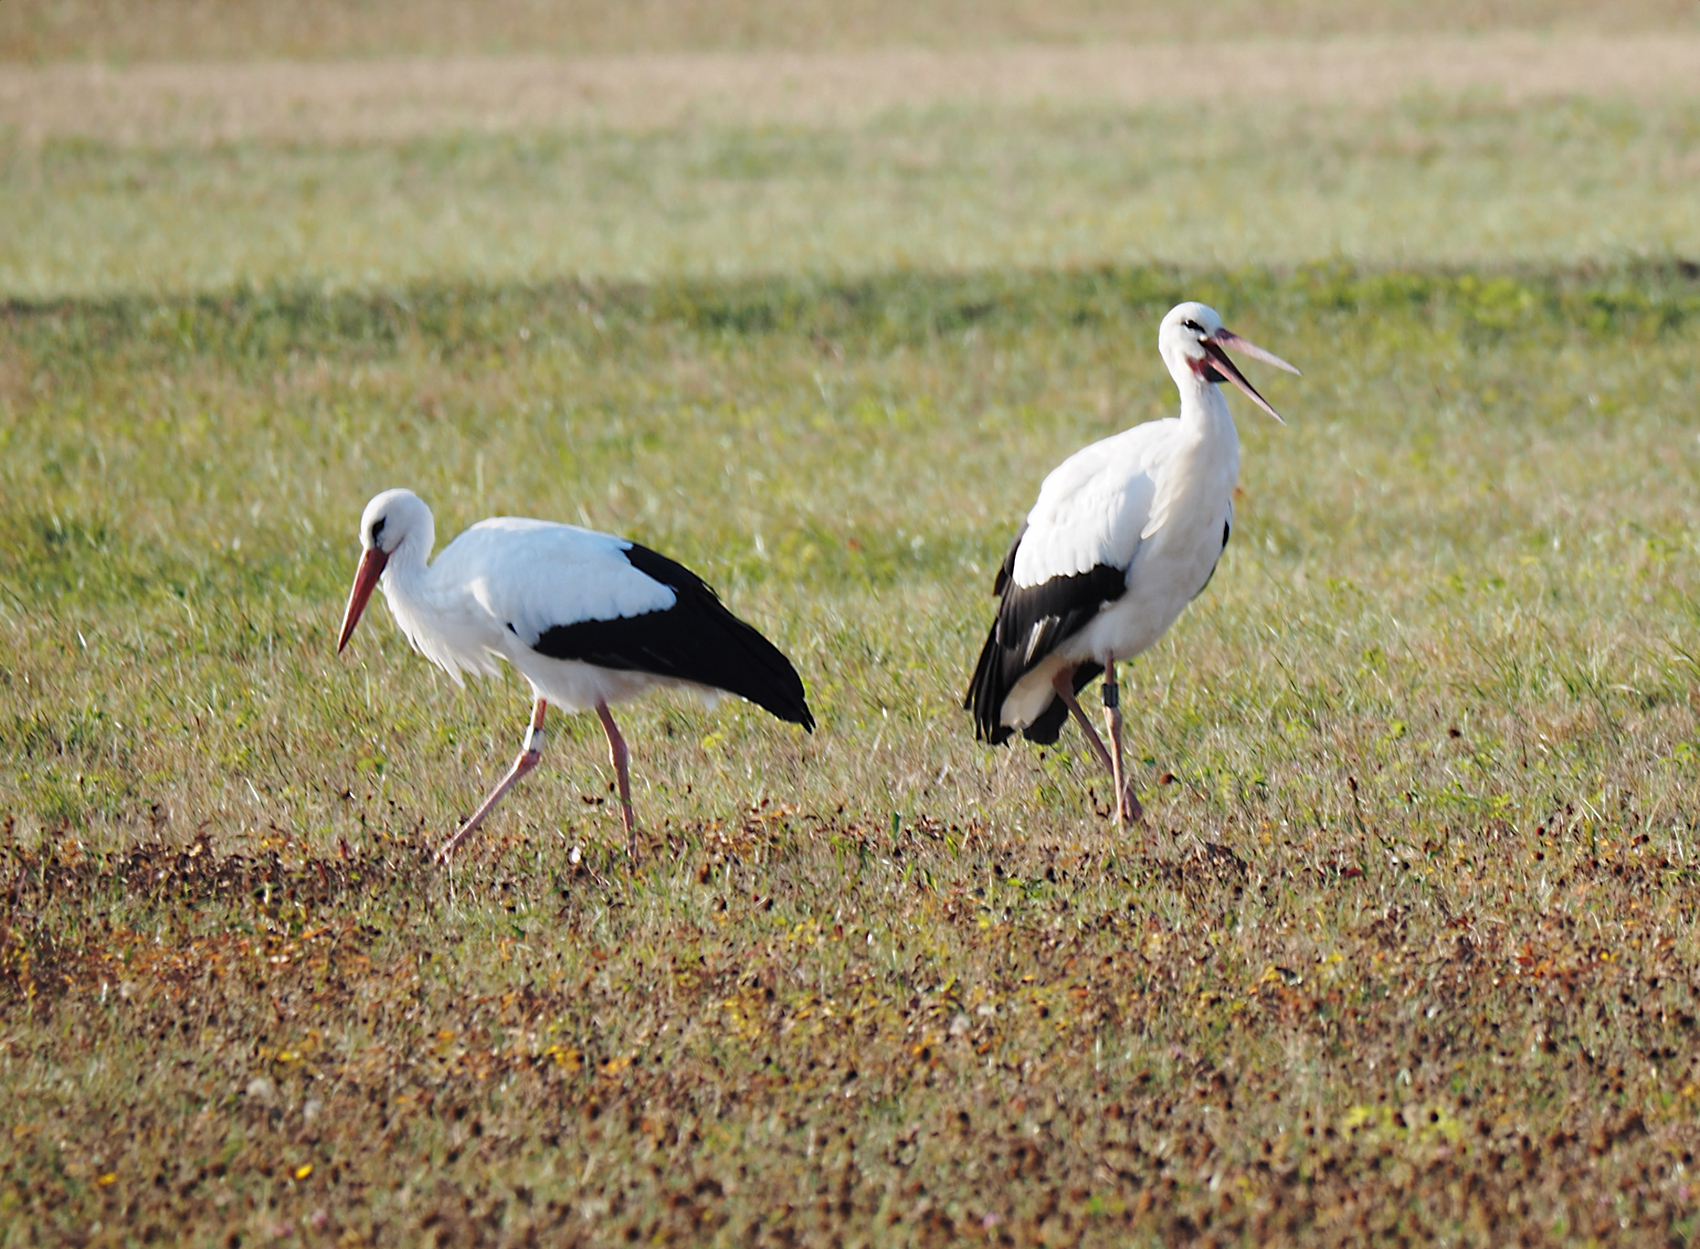 Weissstorch07 (Ciconia ciconia)